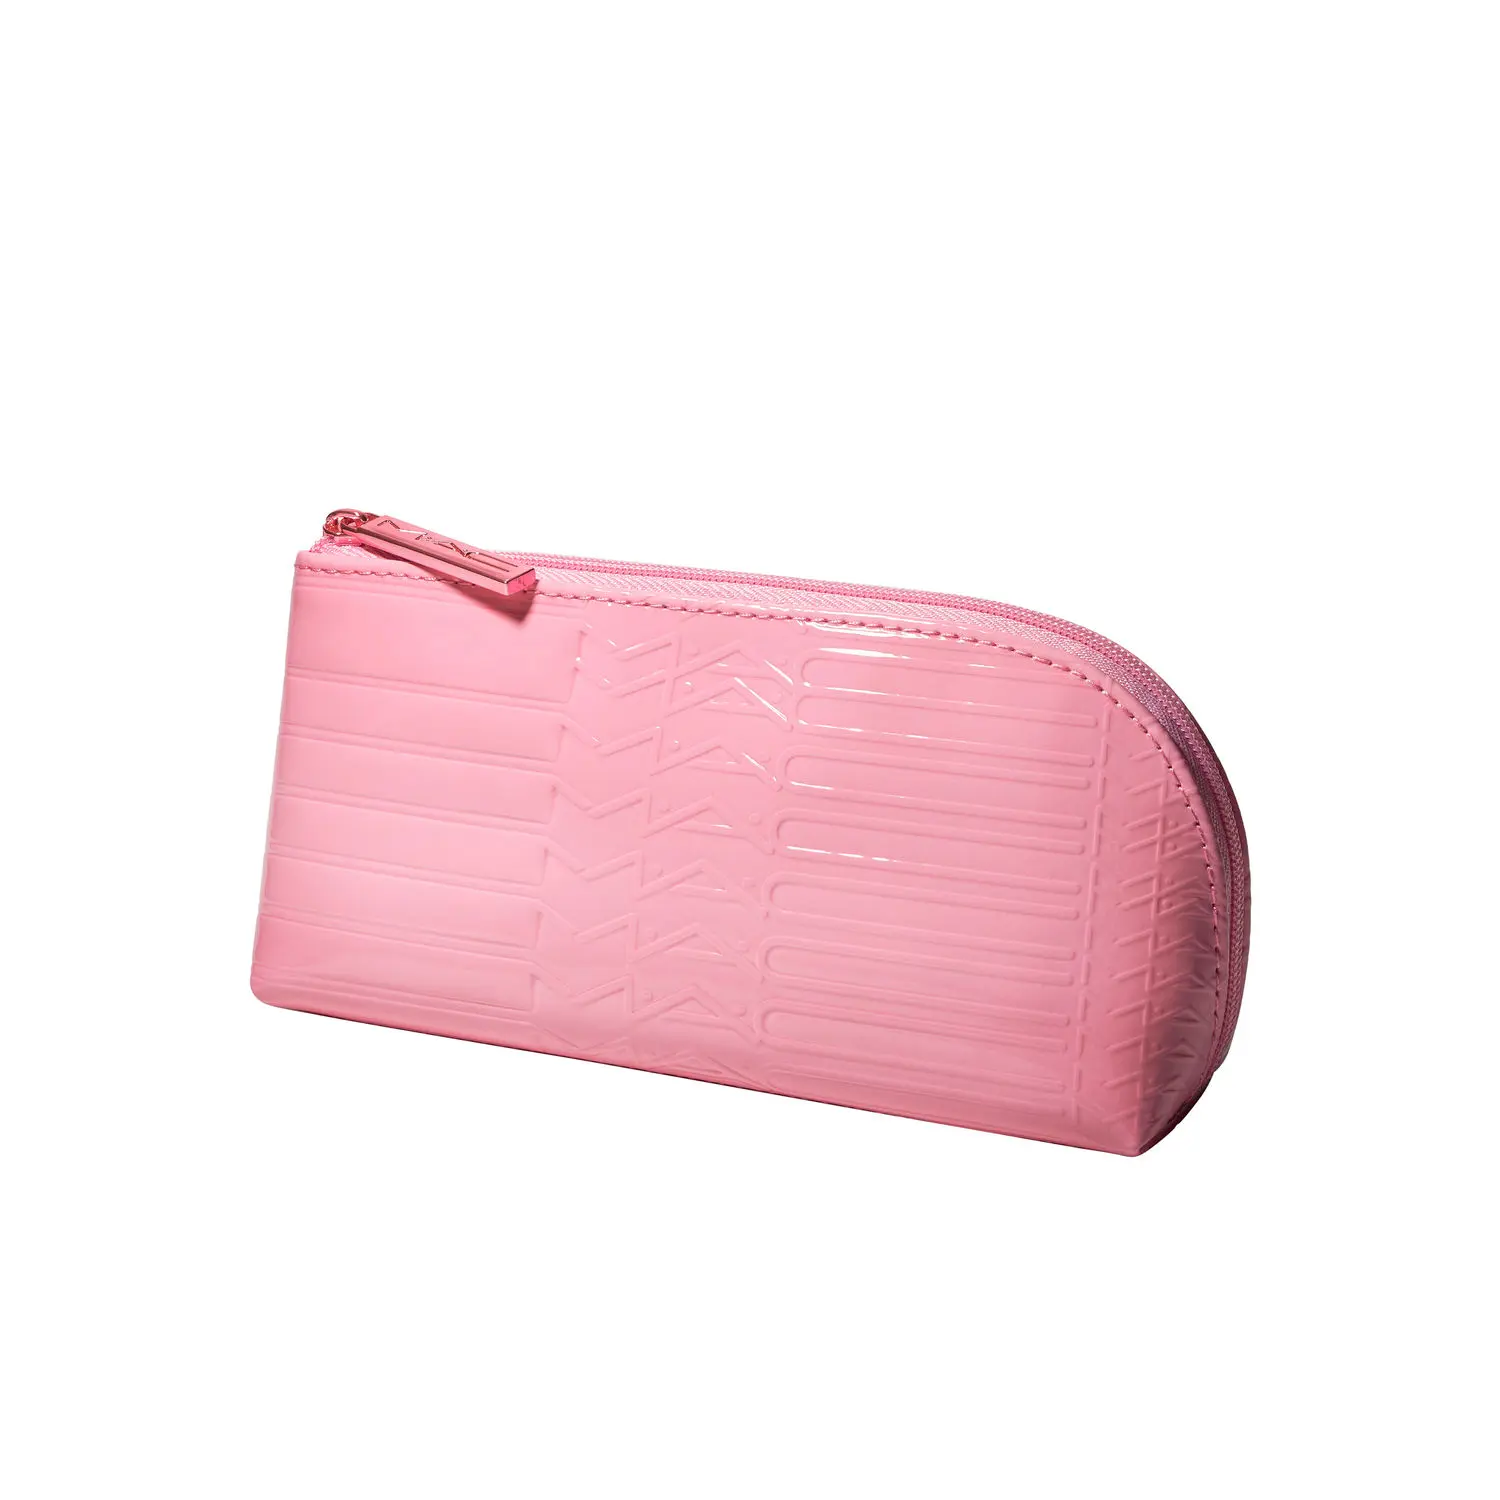 M.A.C Pink Pouch